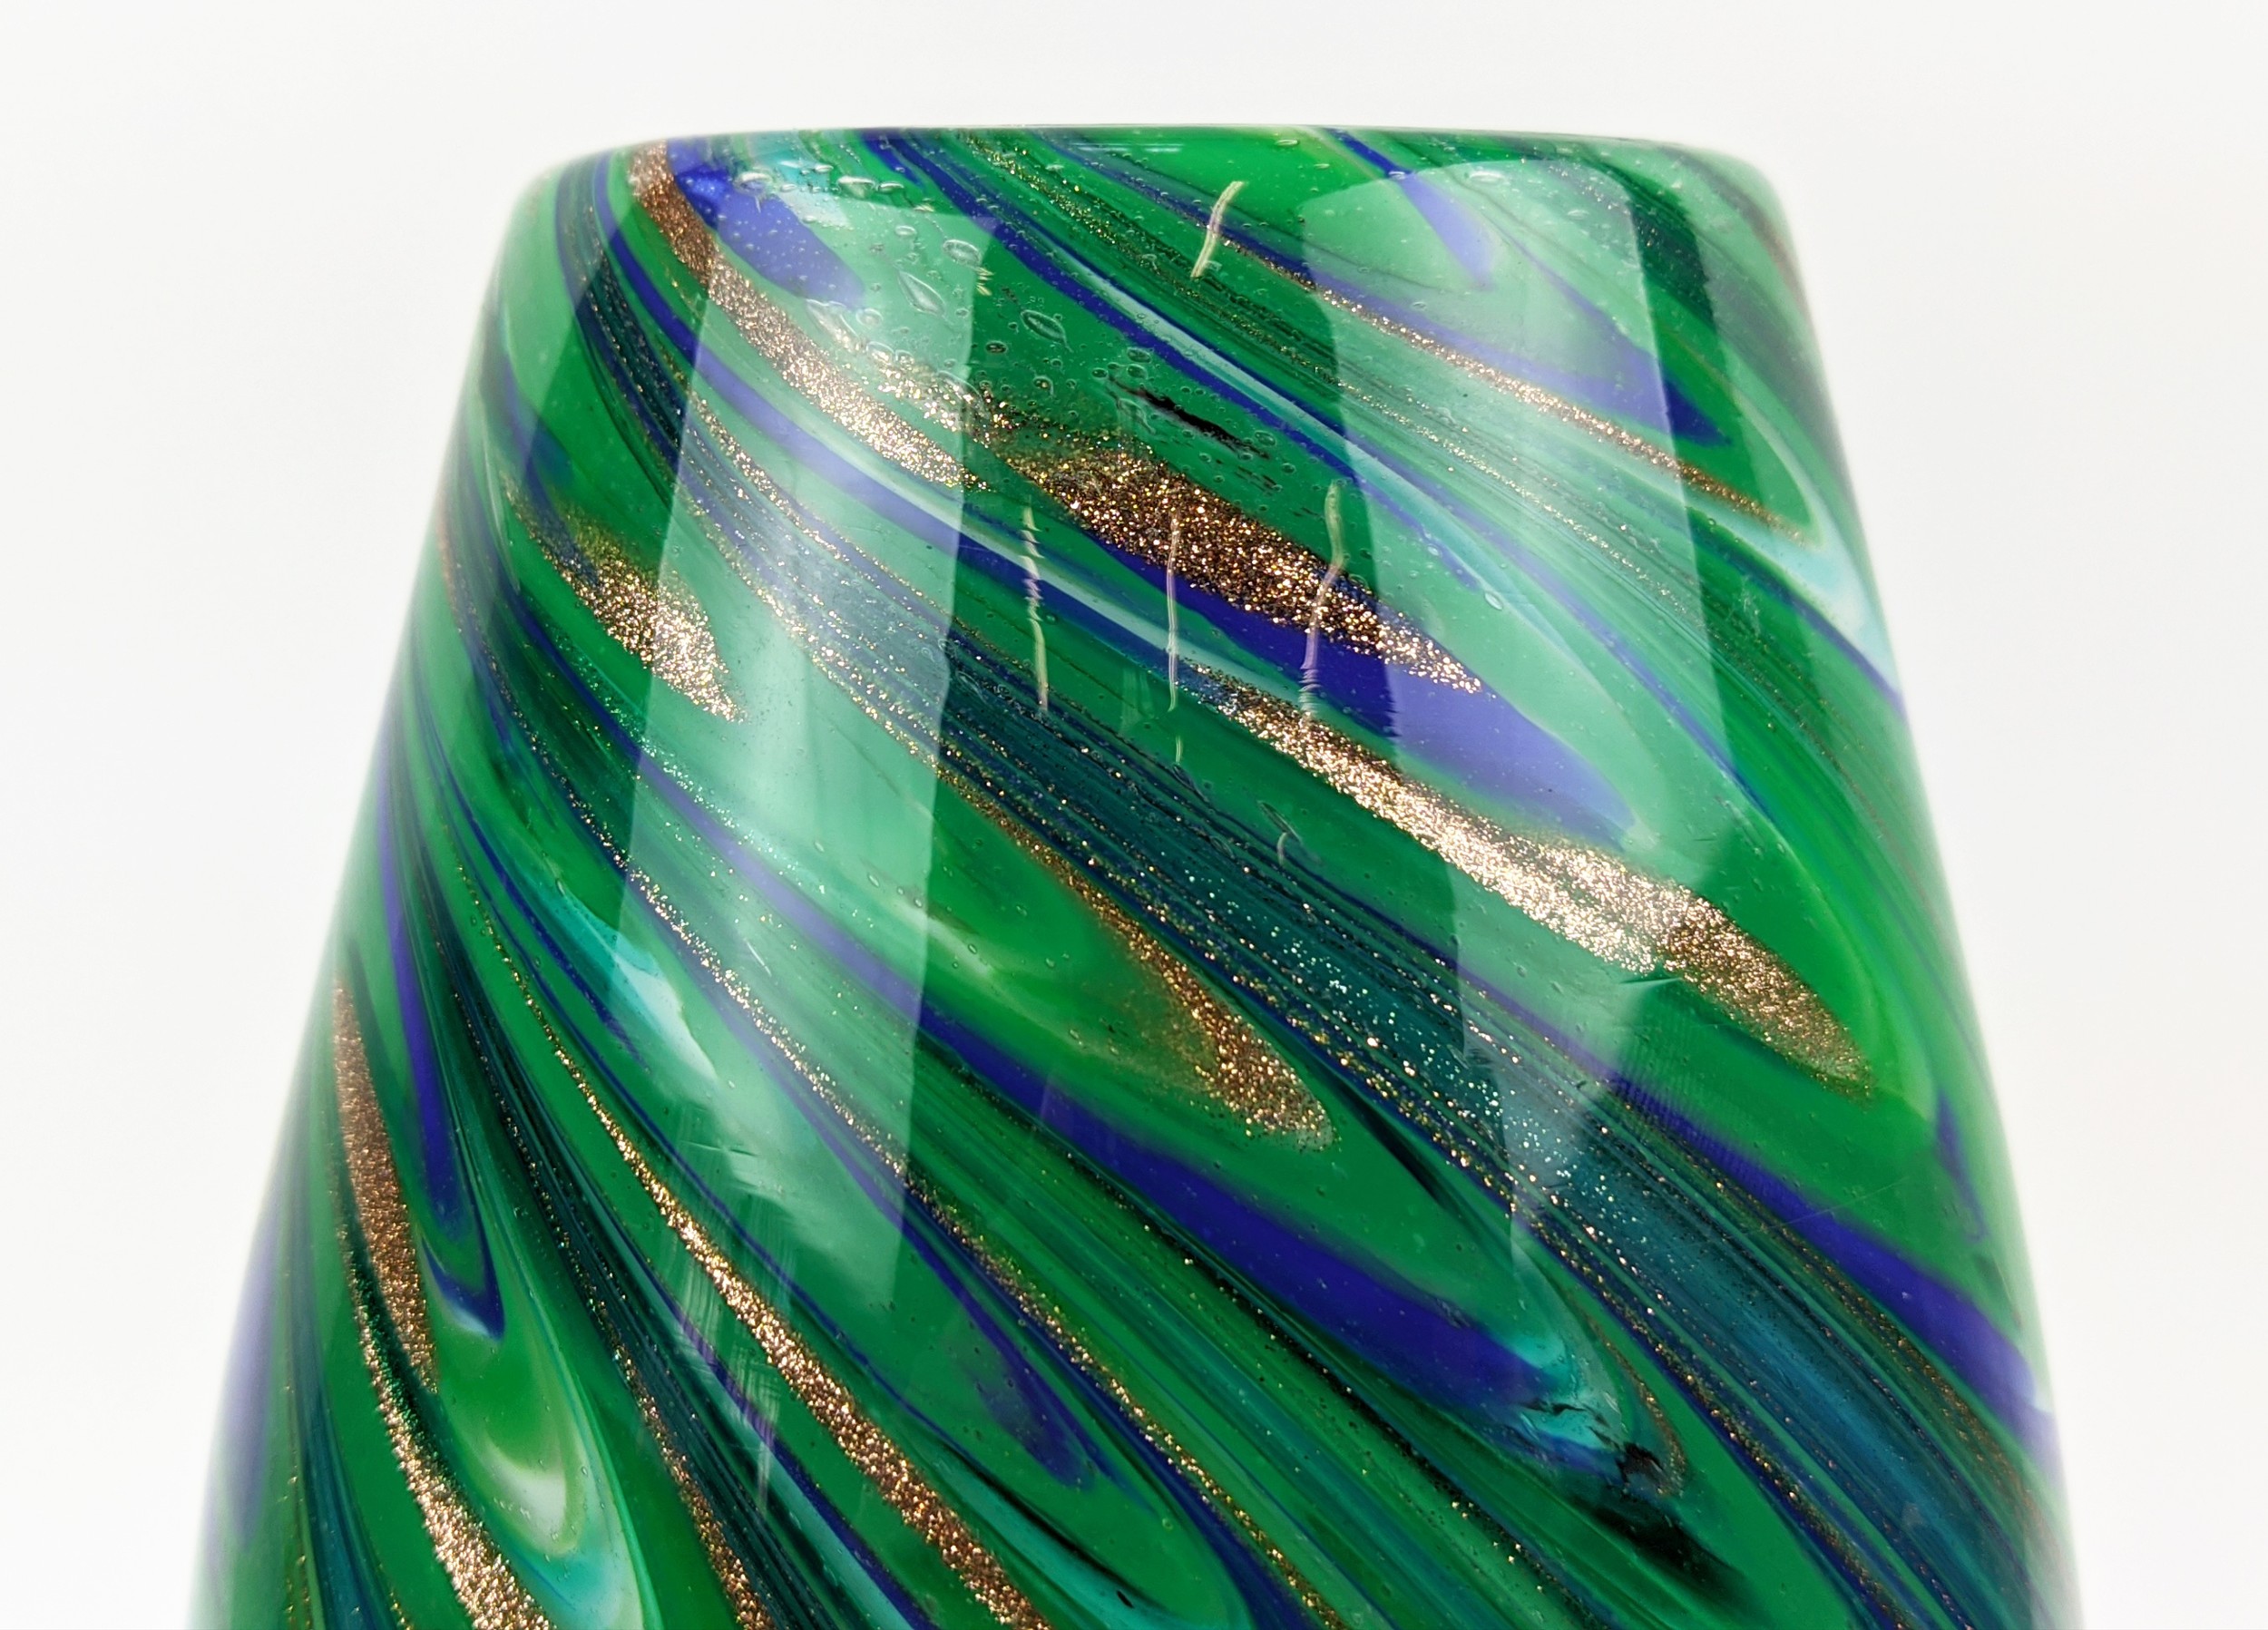 A MURANO GLASS VASE, of ovoid form, with a green, white and blue swirling pattern, gold flecks, 40cm - Image 2 of 7